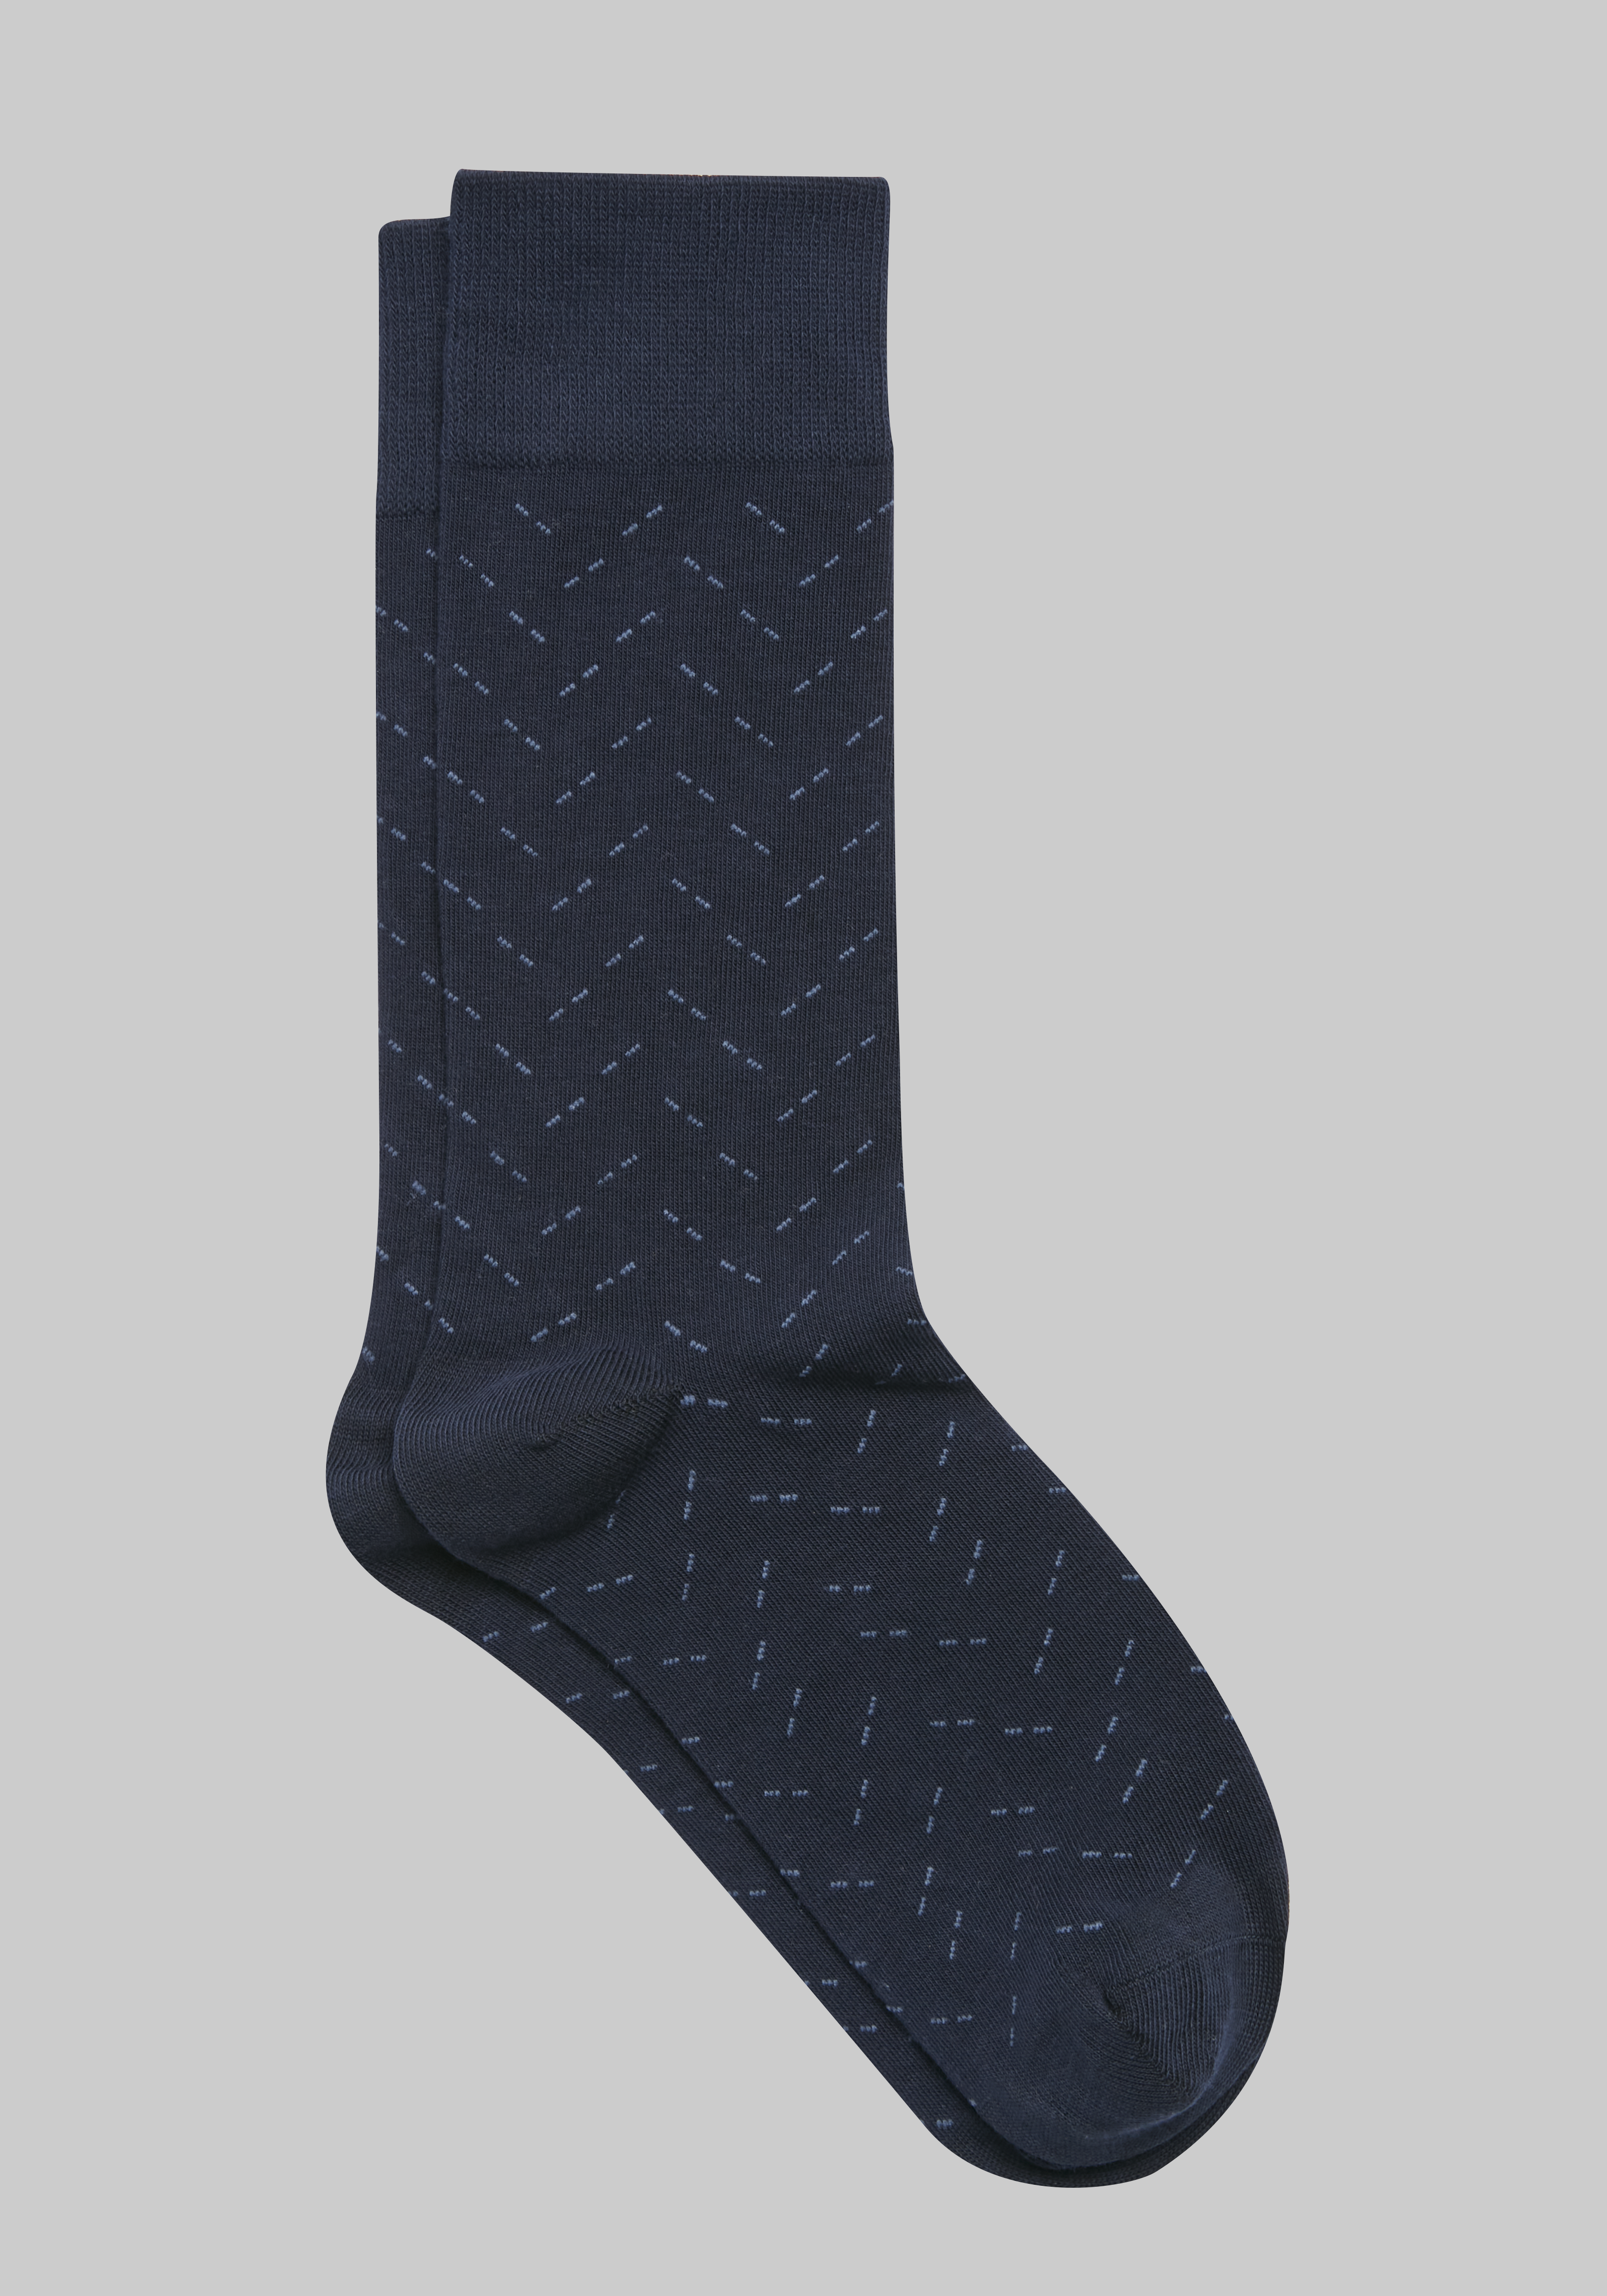 Accessories  Louis Vuitton Womens Socks One Size Gray With Black